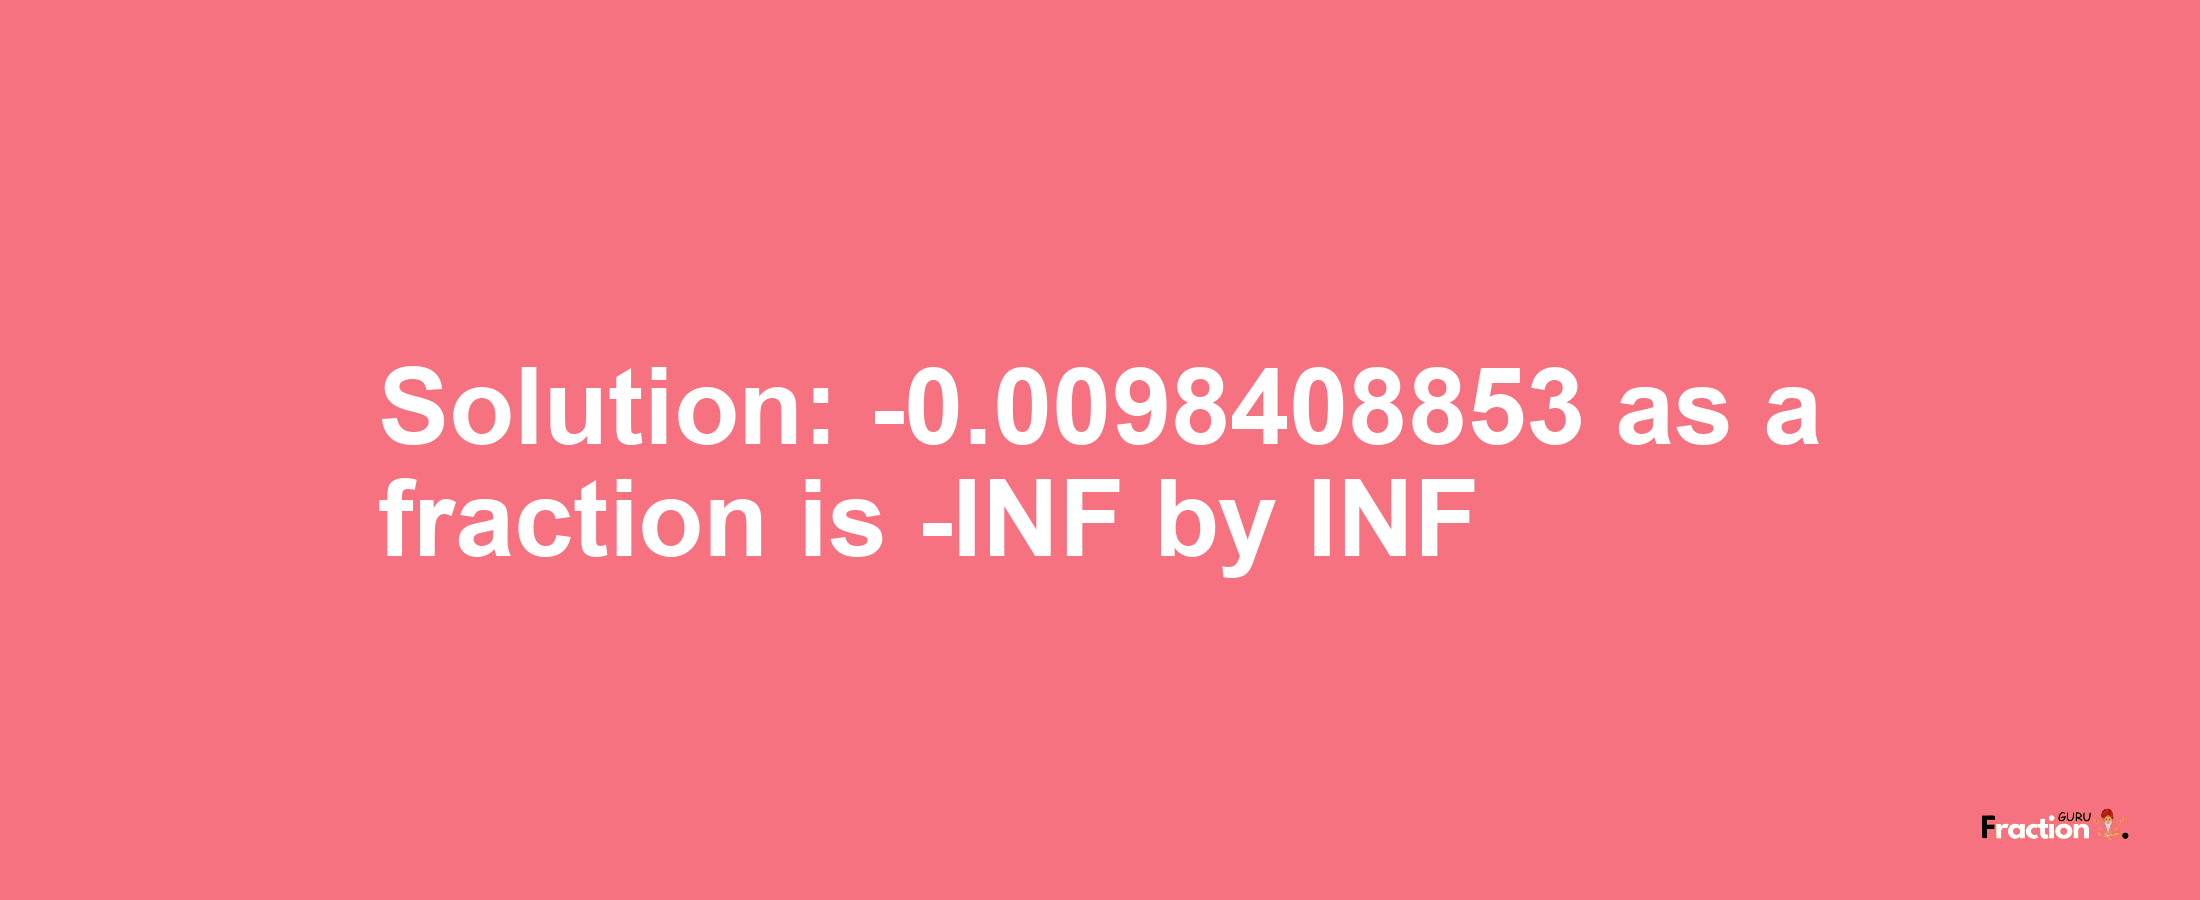 Solution:-0.0098408853 as a fraction is -INF/INF